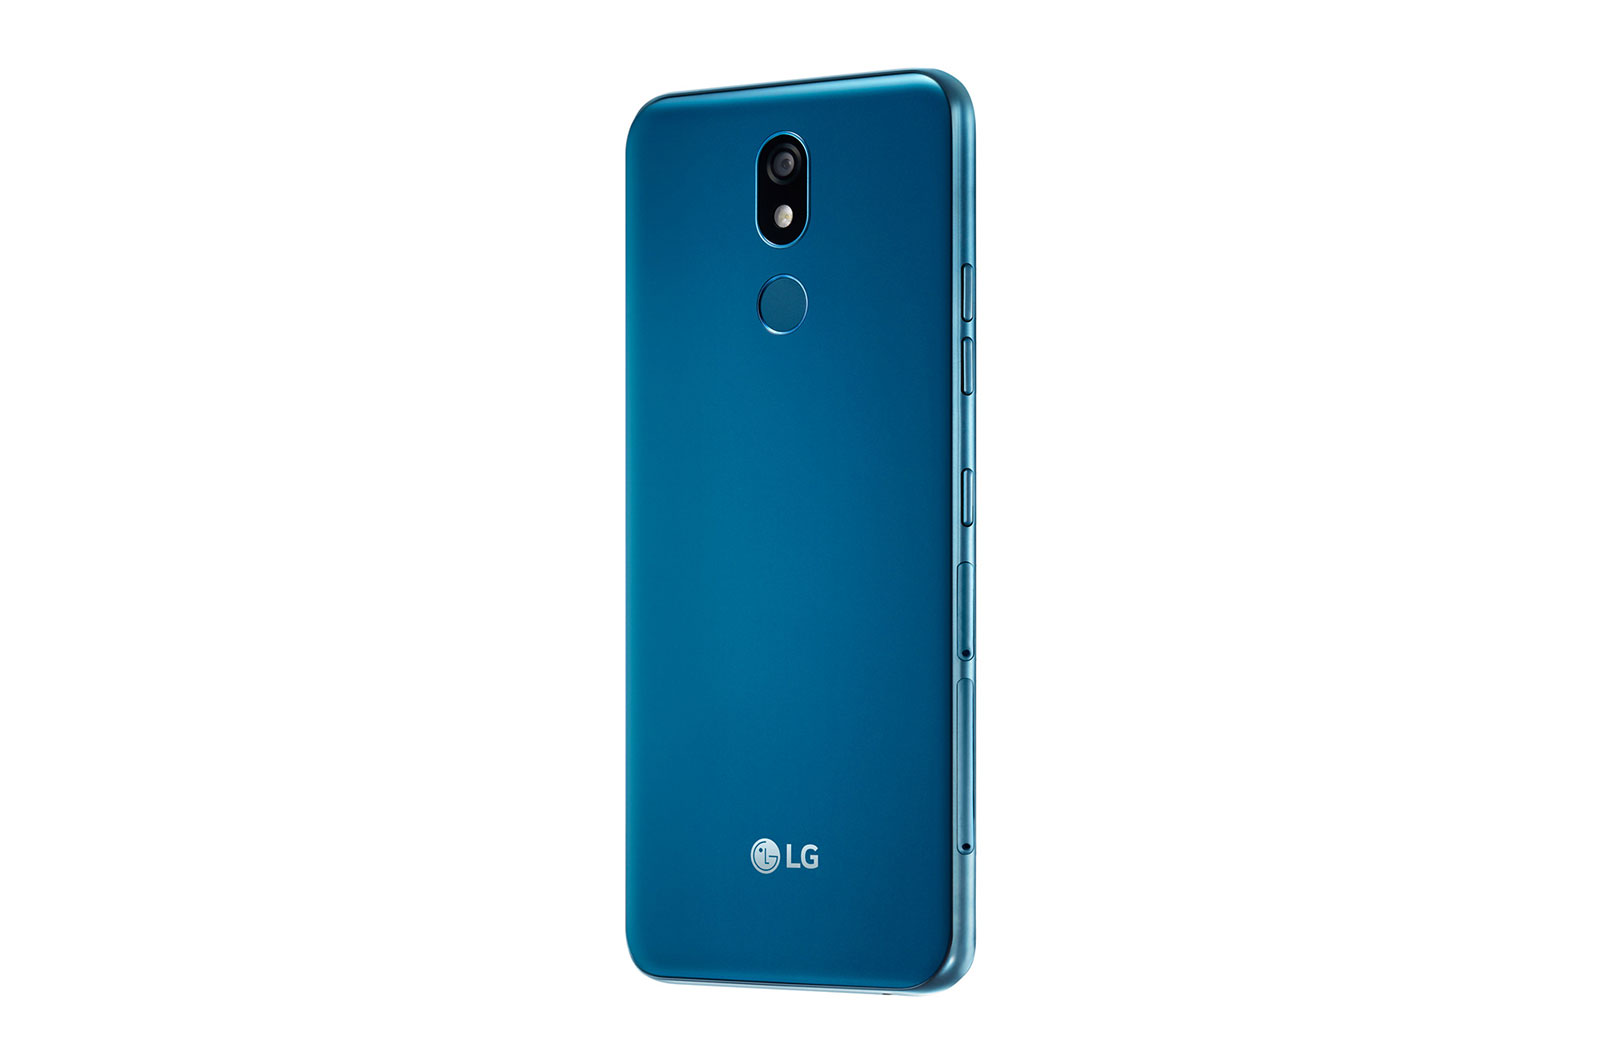 Manifestatie Talloos Matroos LG K40 Smartphone Review: A cheery and affordable handset -  NotebookCheck.net Reviews